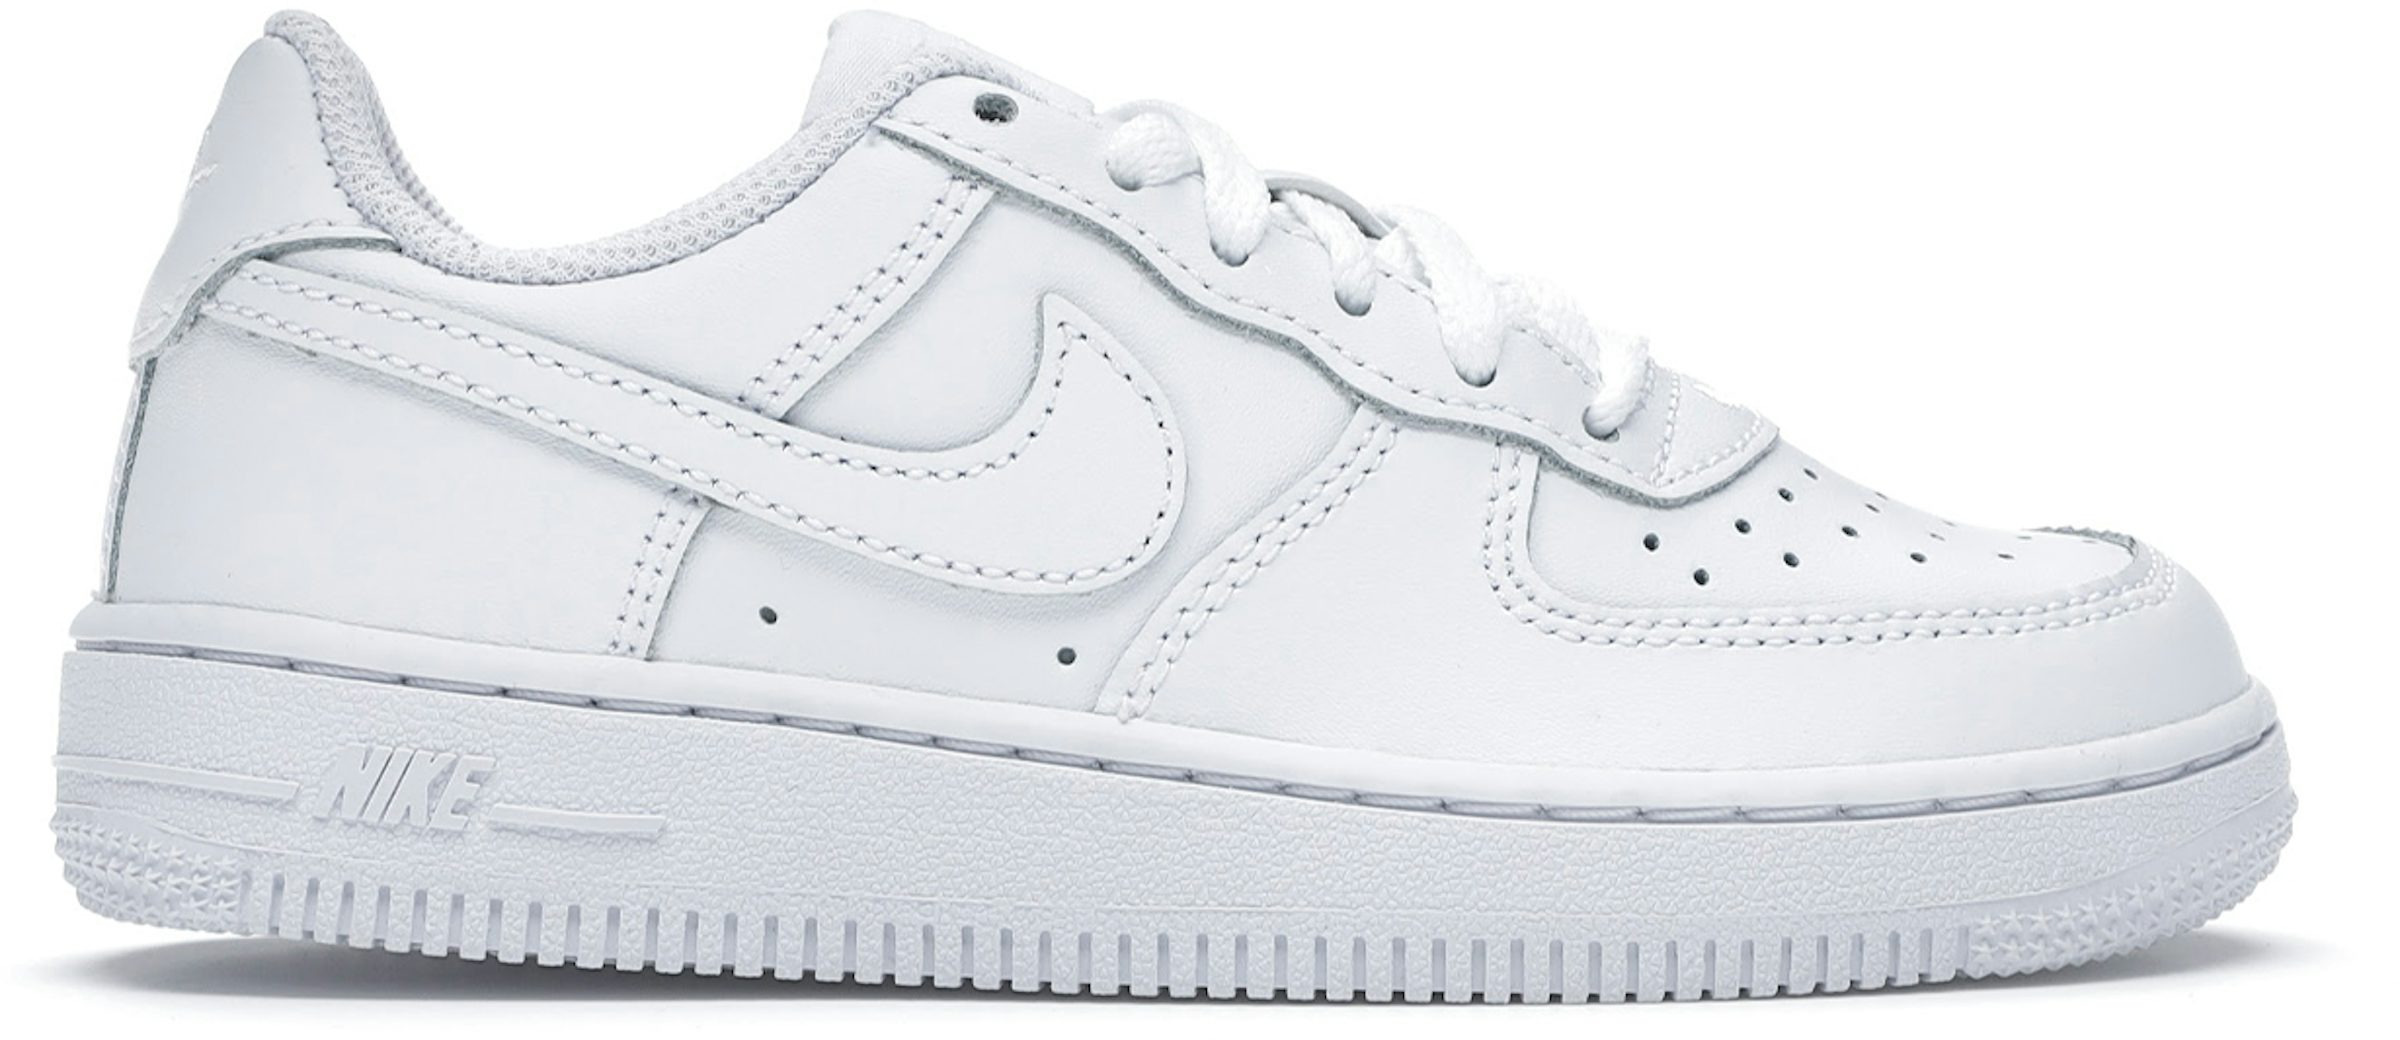 Nike Kids Air Force 1 PS Stussy - Fossil - Stadium Goods